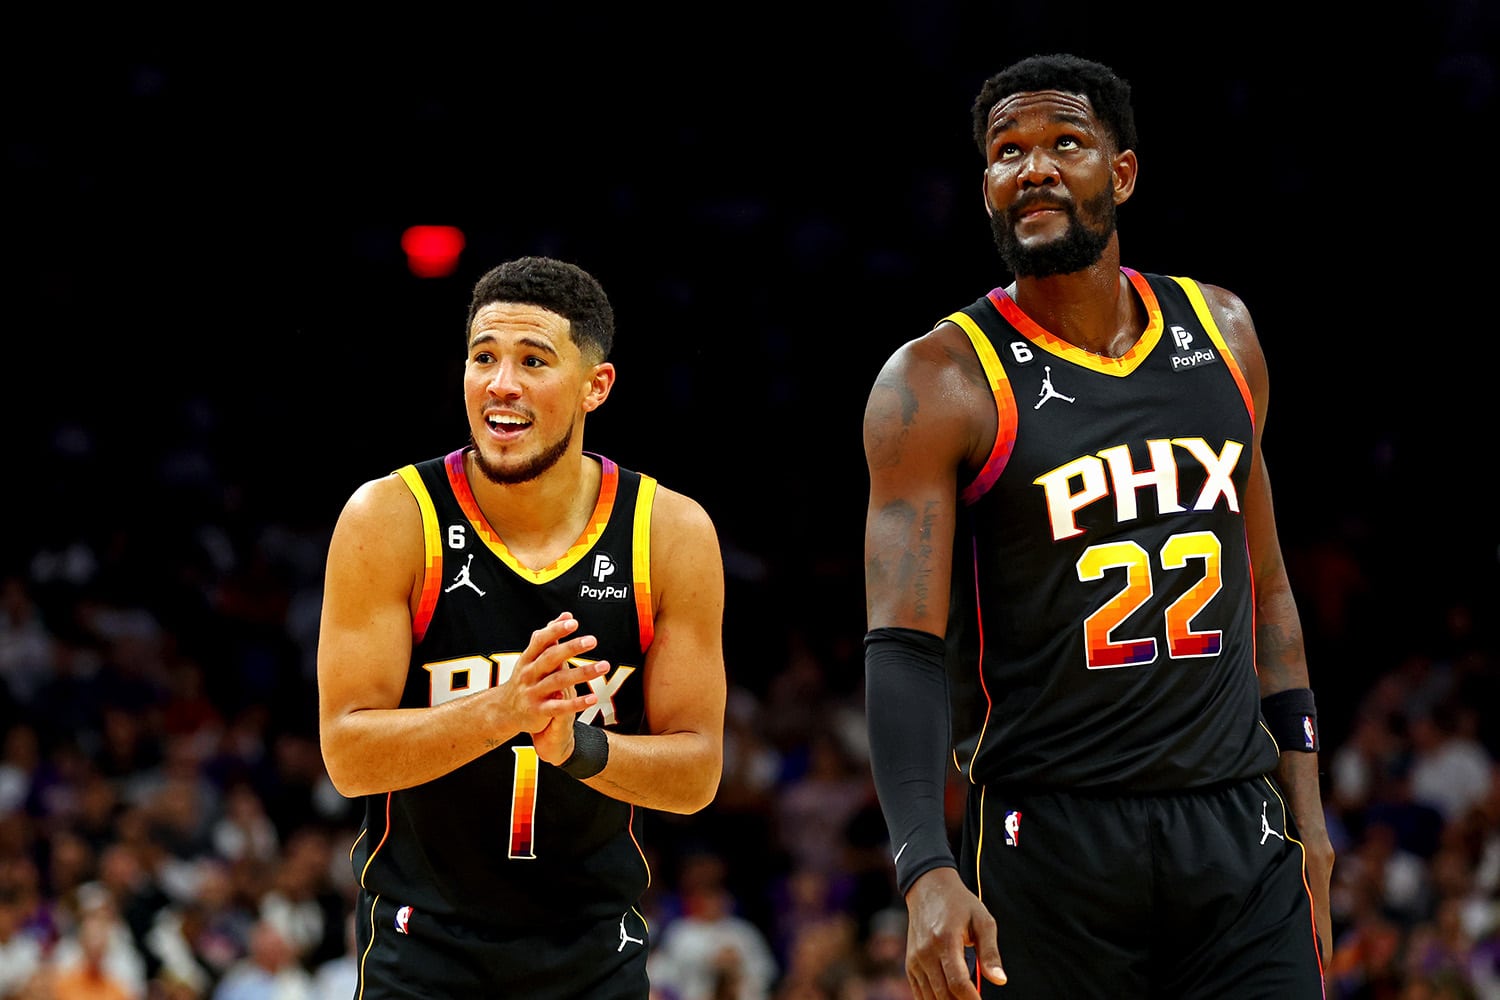 Phoenix Suns players Devin Booker and Deandre Ayton standing on basketball court